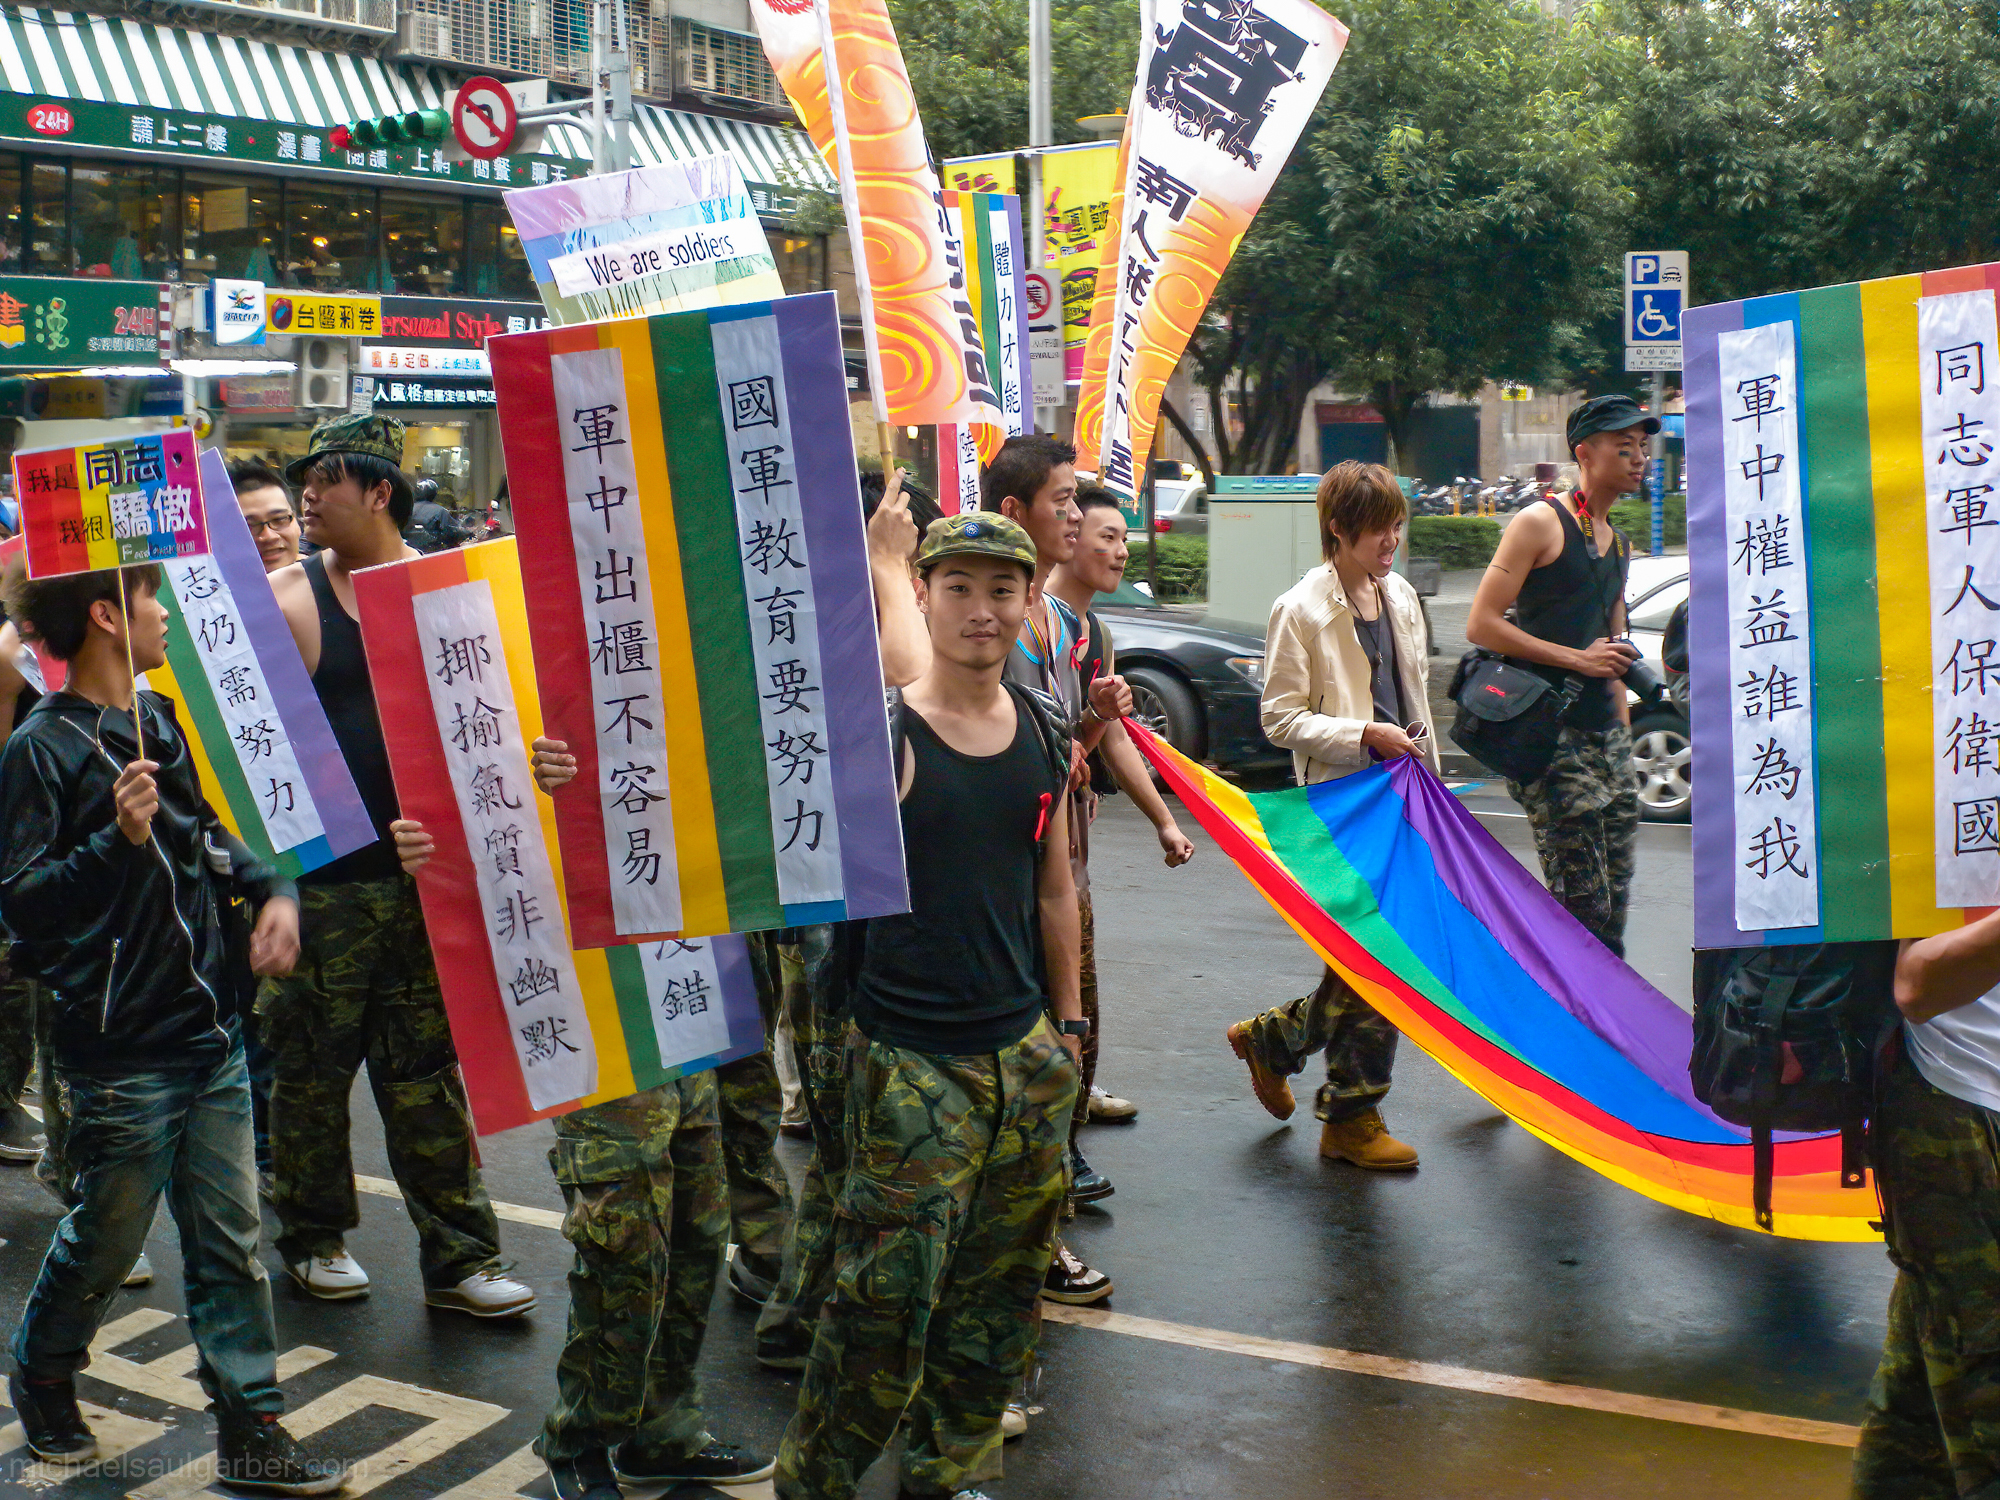 Sign reads "Military training requires diligence. Coming out of the closet in the army isn't easy", Taiwan Pride, 2010